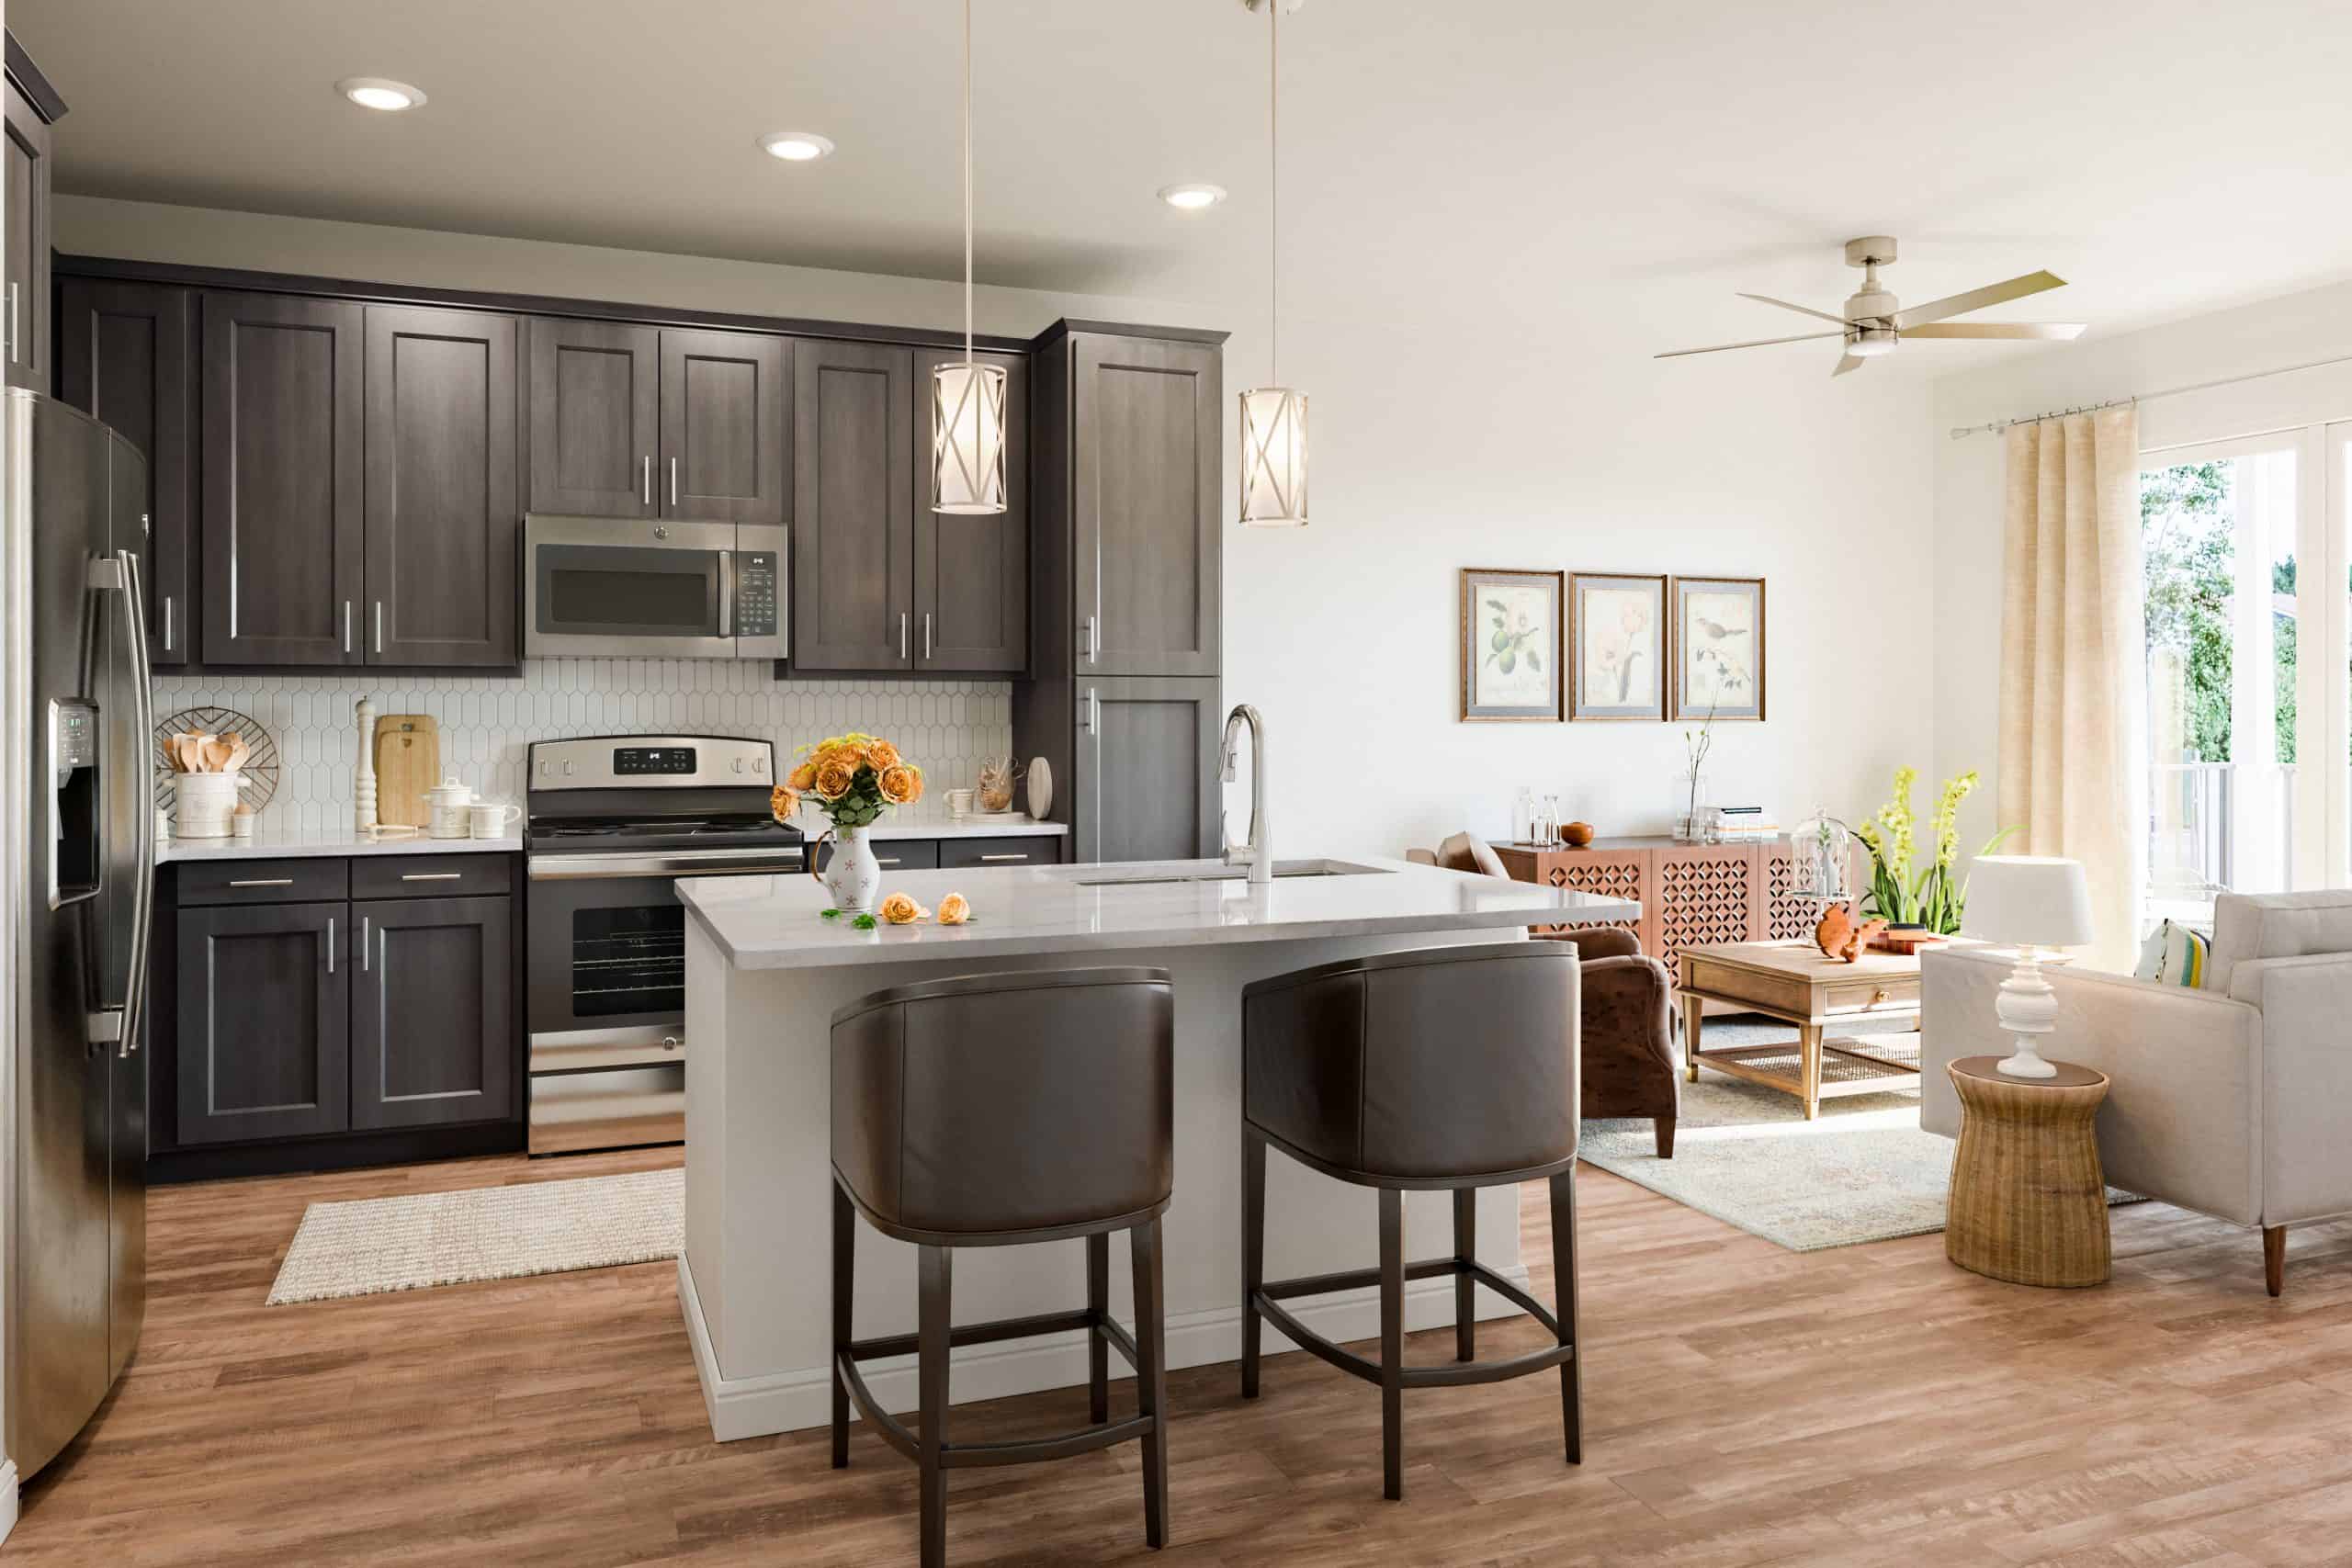 Model kitchen at our 55 and over community in Cypress, featuring wood grain floor paneling and a kitchen island.